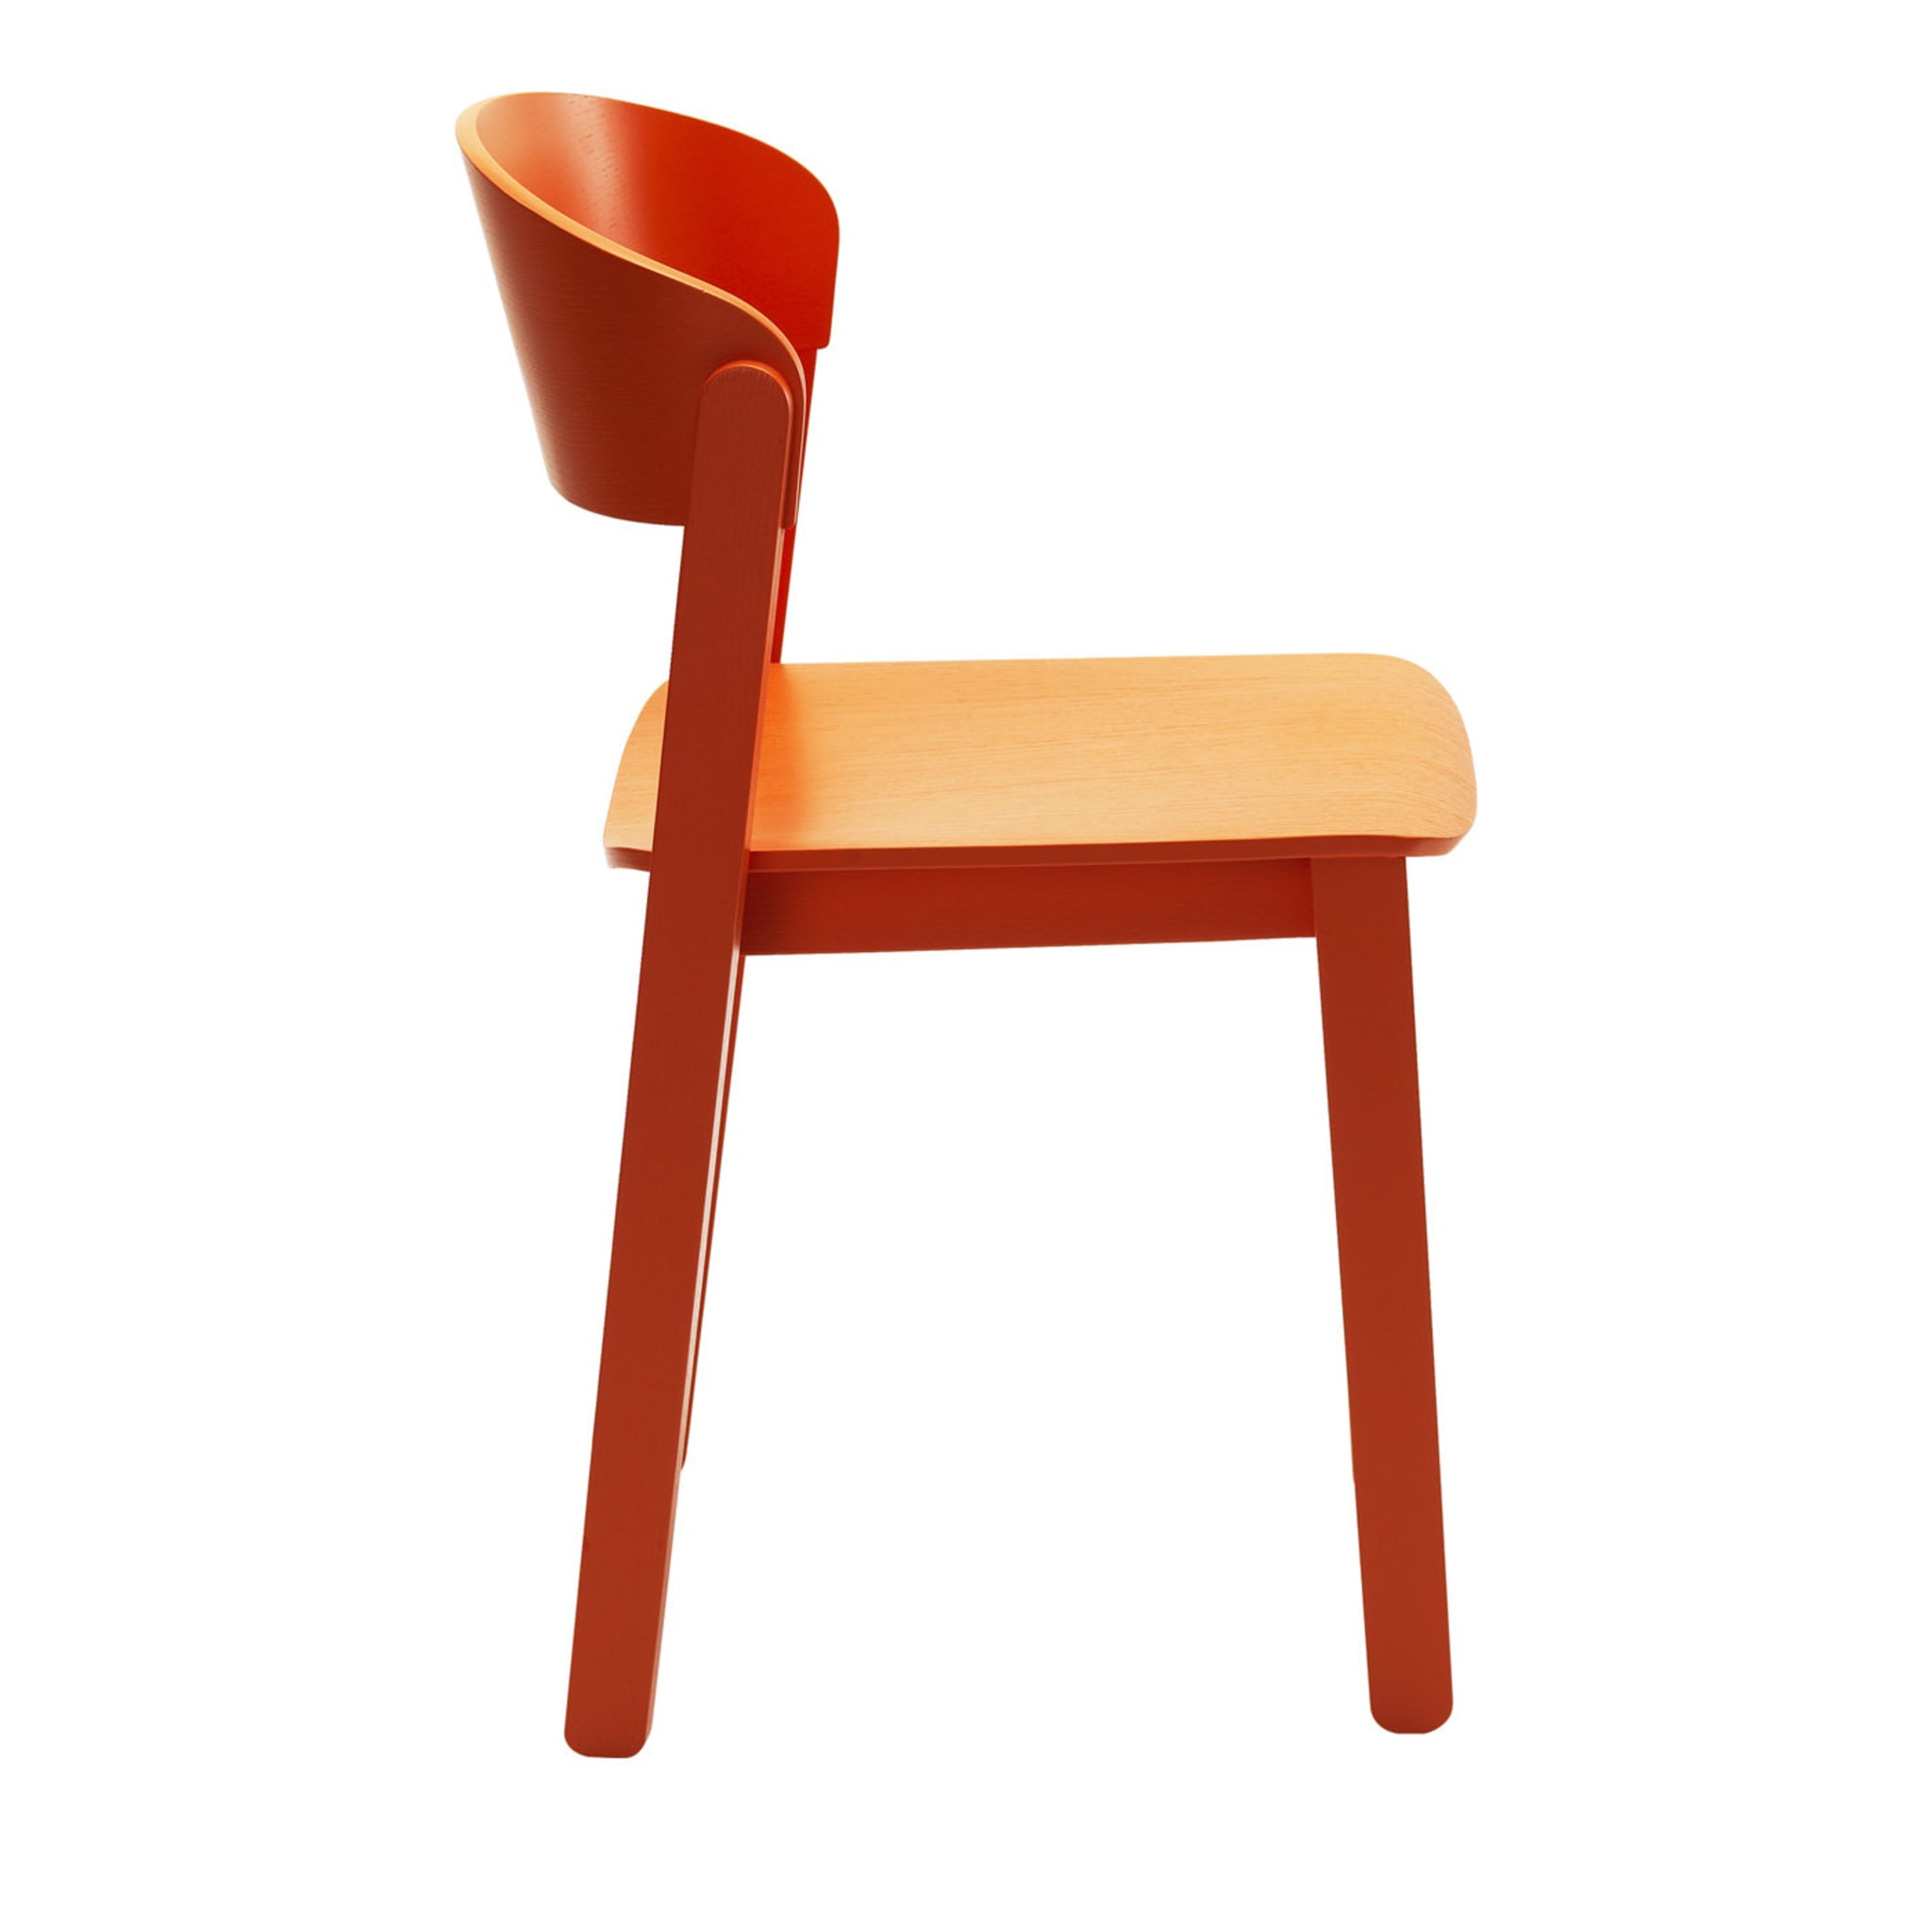 Set of 2 Salmon Orange Pur Chairs by Note Design Studio - Main view